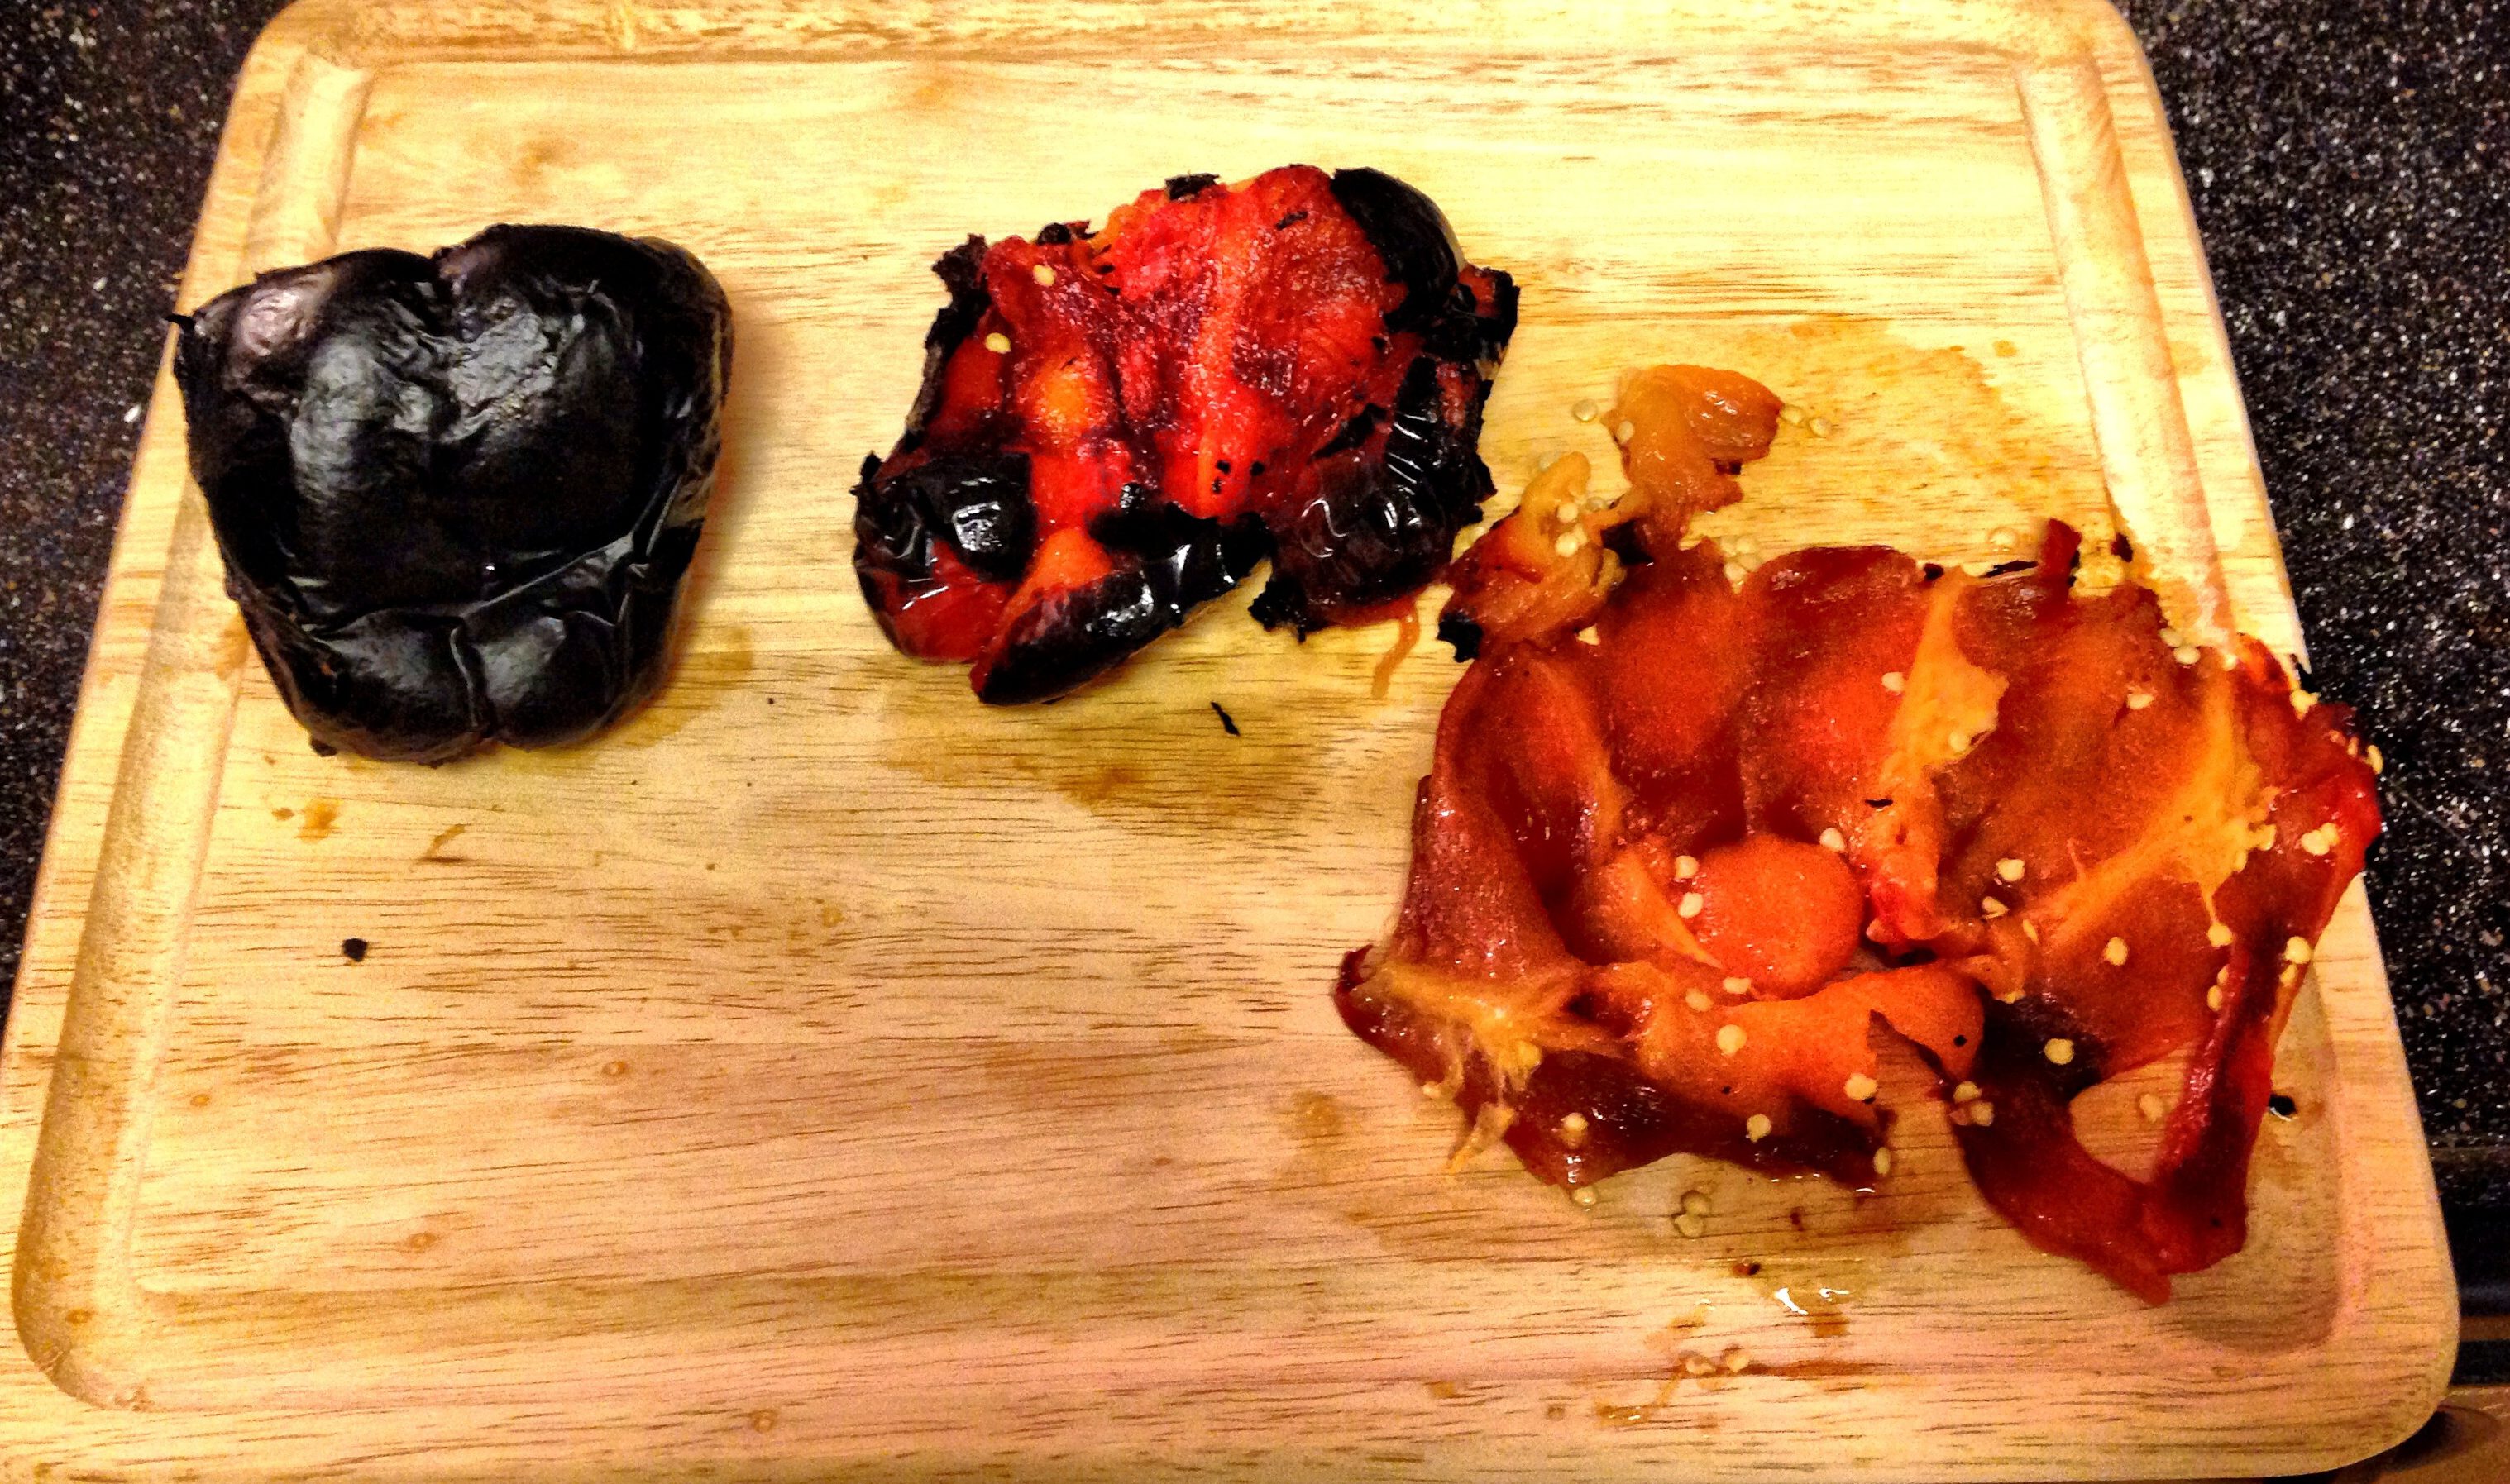 Step Four: Peel off blackened skin, slice peppers open, scrape out the seeds and discard.